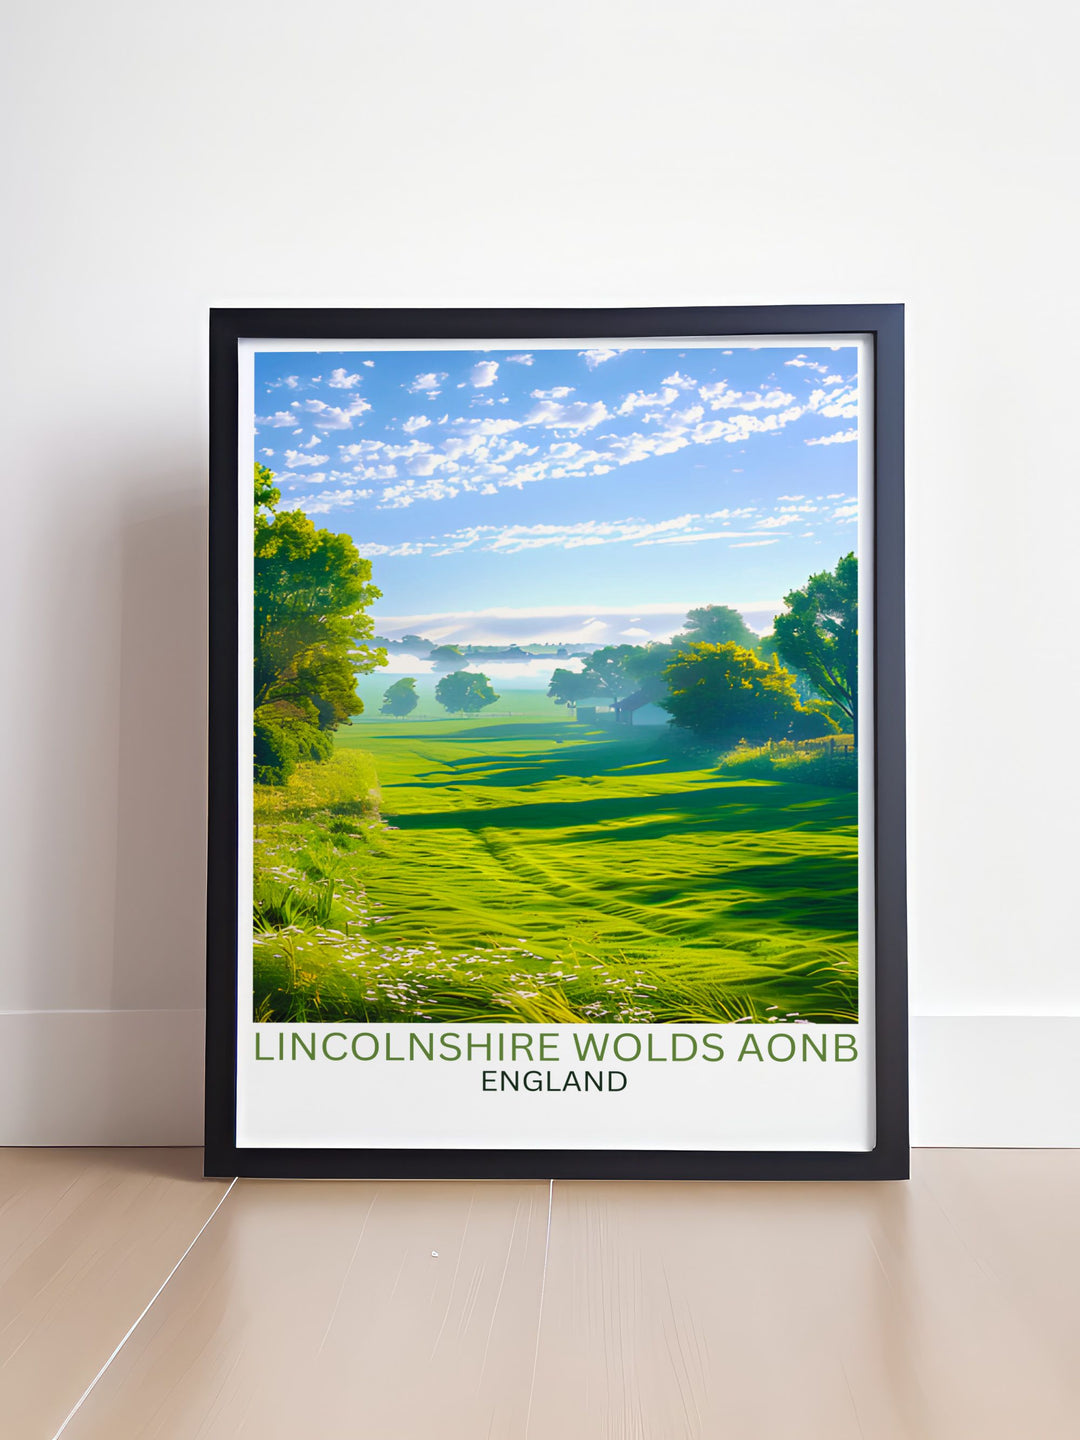 Framed artwork of Belchford showcasing its historic church and natural beauty, ideal for enhancing any room with a touch of rural elegance.